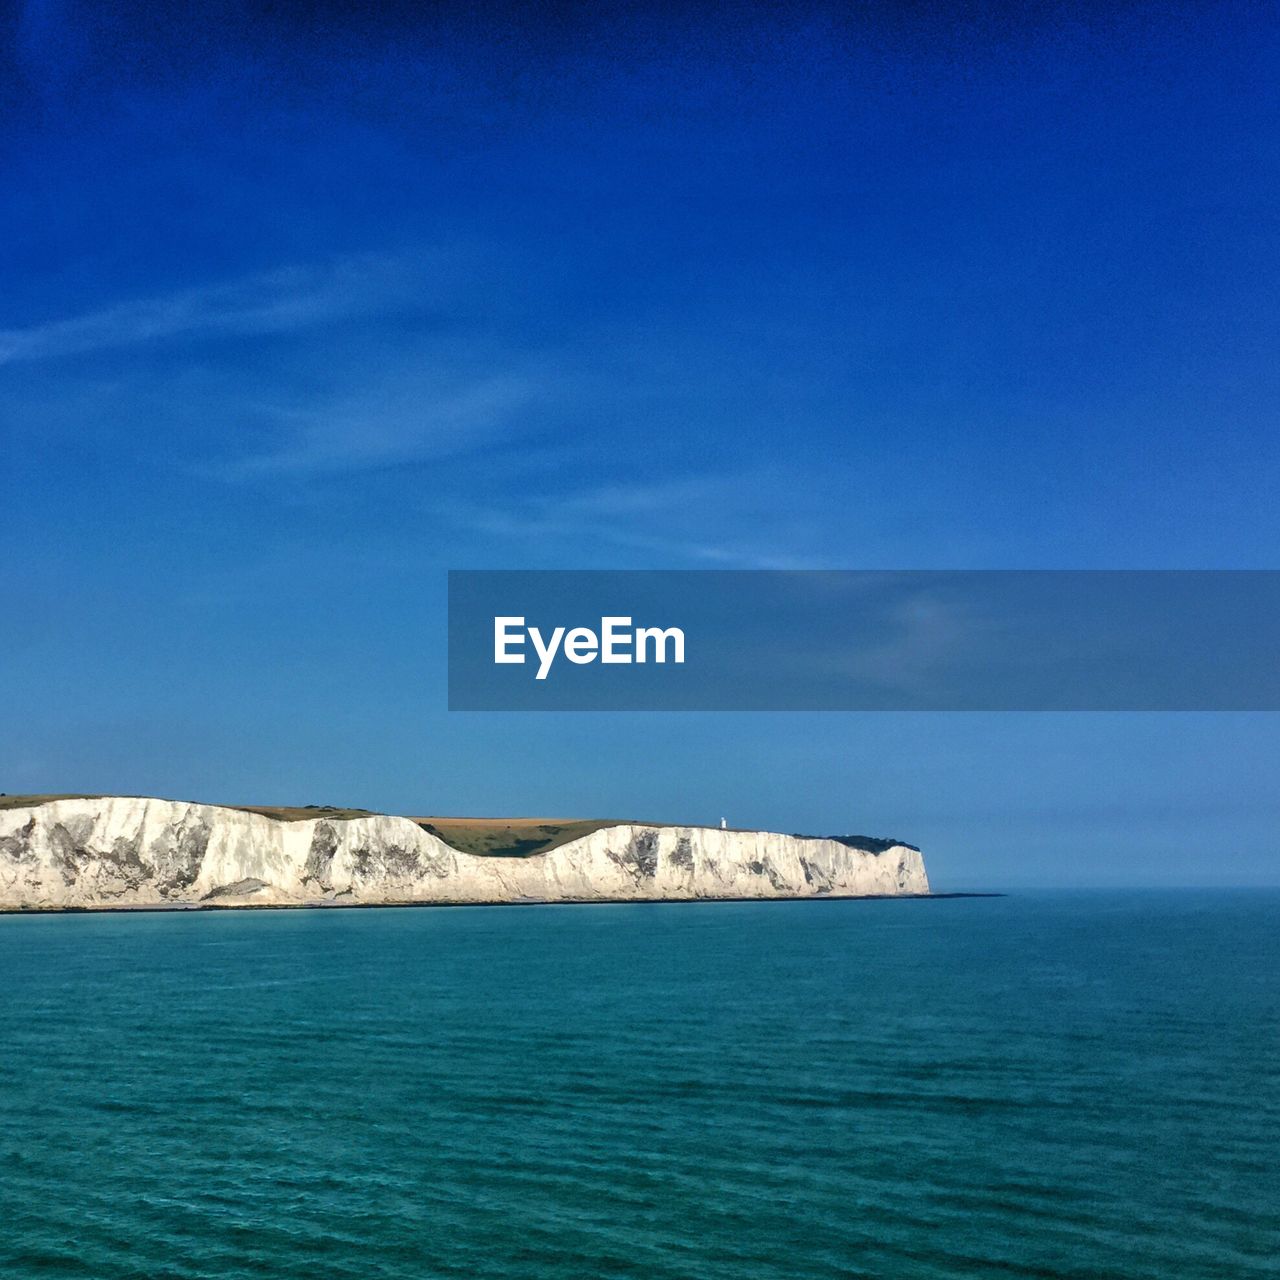 White cliffs of dover by sea against blue sky